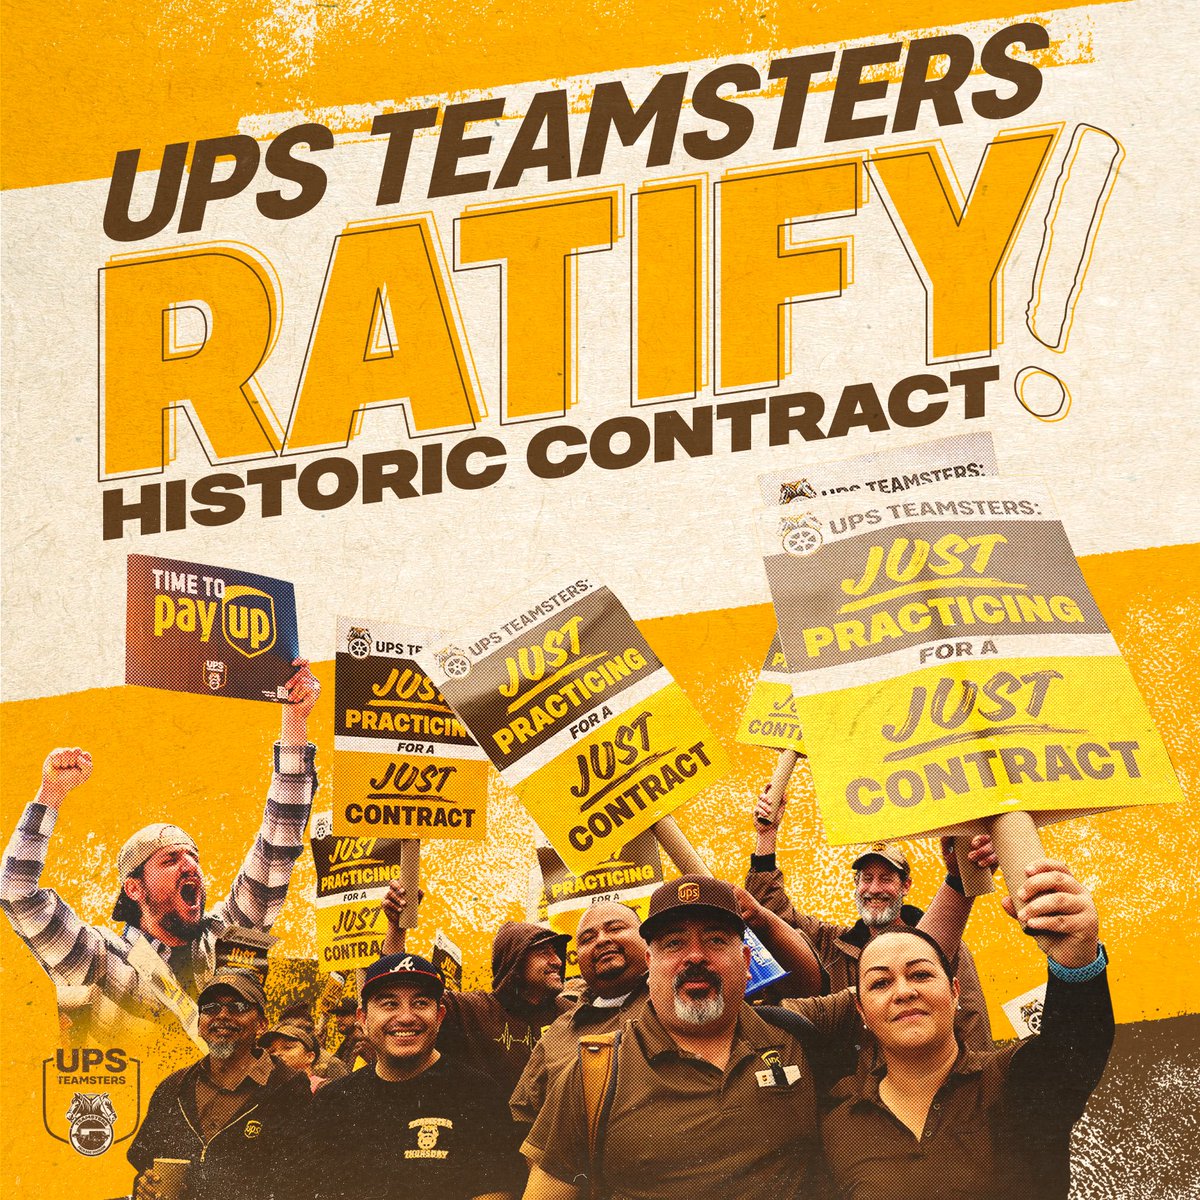 💥TEAMSTERS RATIFY HISTORIC UPS CONTRACT

Today, #Teamsters voted by an overwhelming 86.3 percent to ratify the most historic collective bargaining agreement in the history of @UPS: teamster.org/2023/08/teamst… 
#HotLaborSummer #1u ✊✊✊